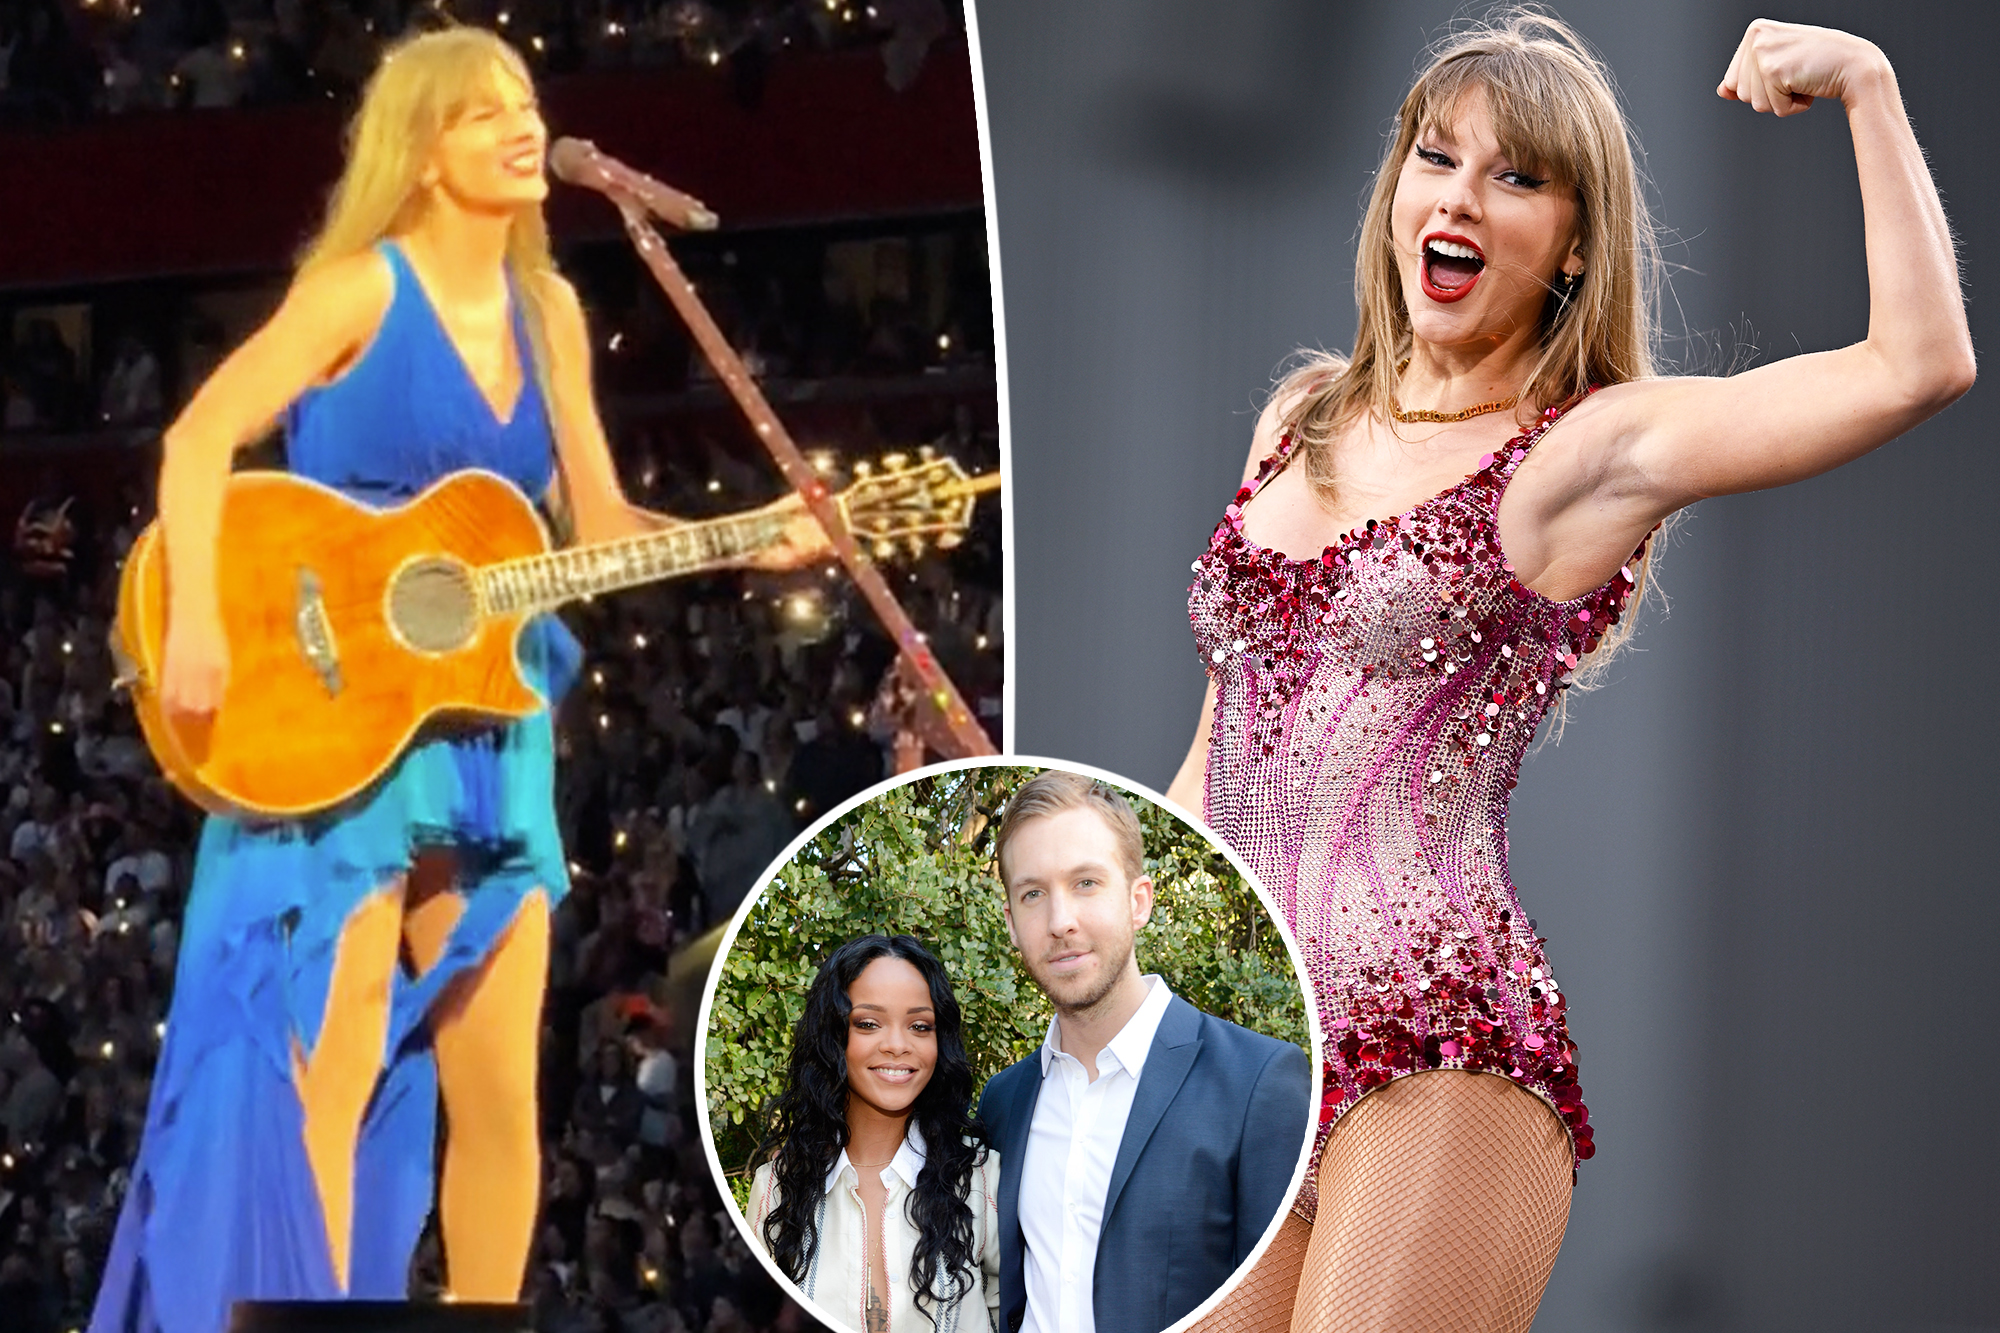 Taylor Swift Shocks Fans with Unplugged Cover of Calvin Harris and Rihanna's Smash Hit at Eras Tour Stop